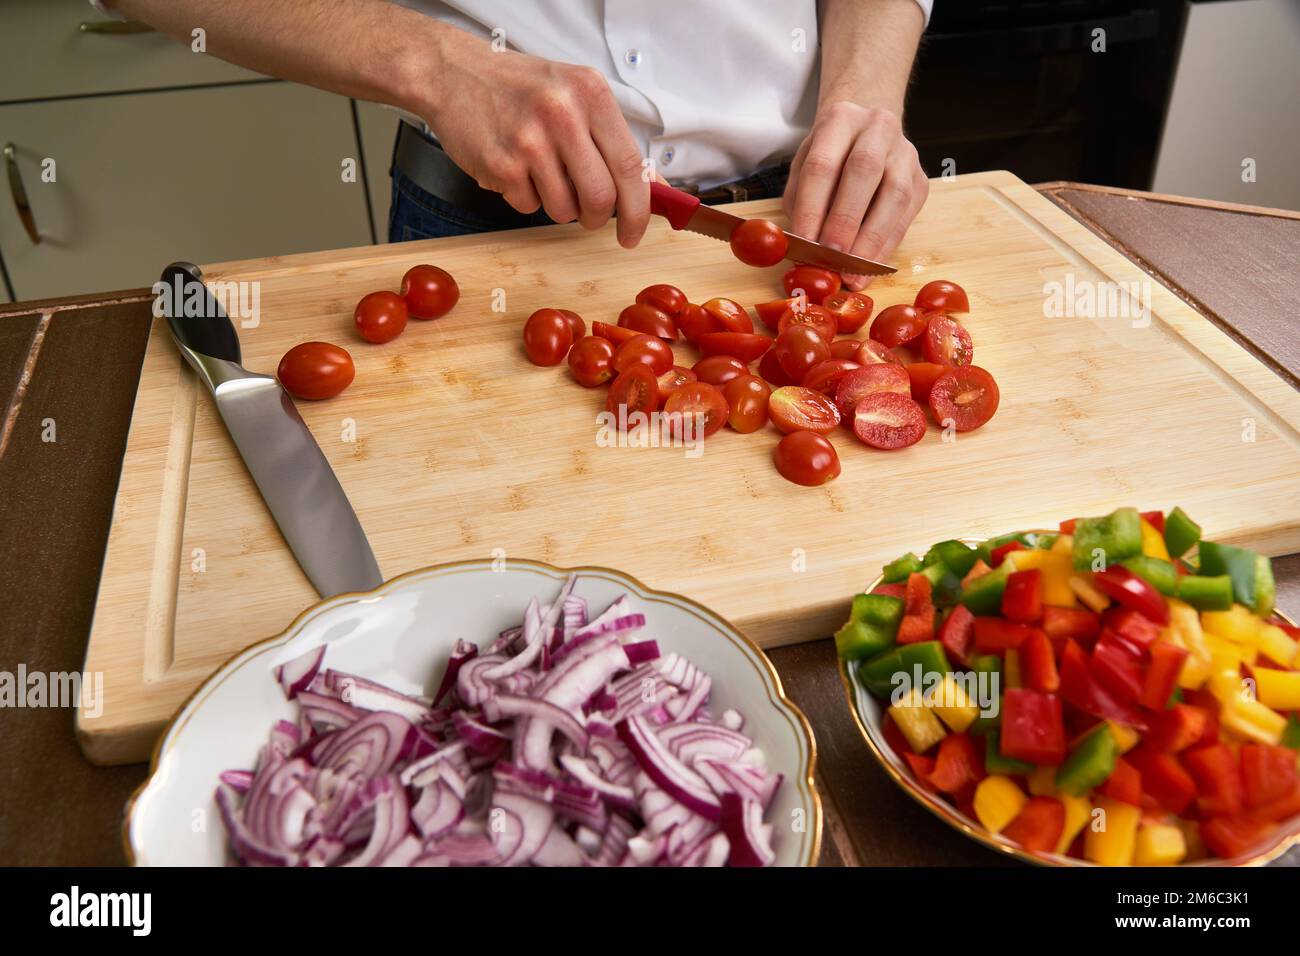 Man's hands cutting fresh tomatos in the kitchen, preparing a meal for lunch. Frontal view. Stock Photo